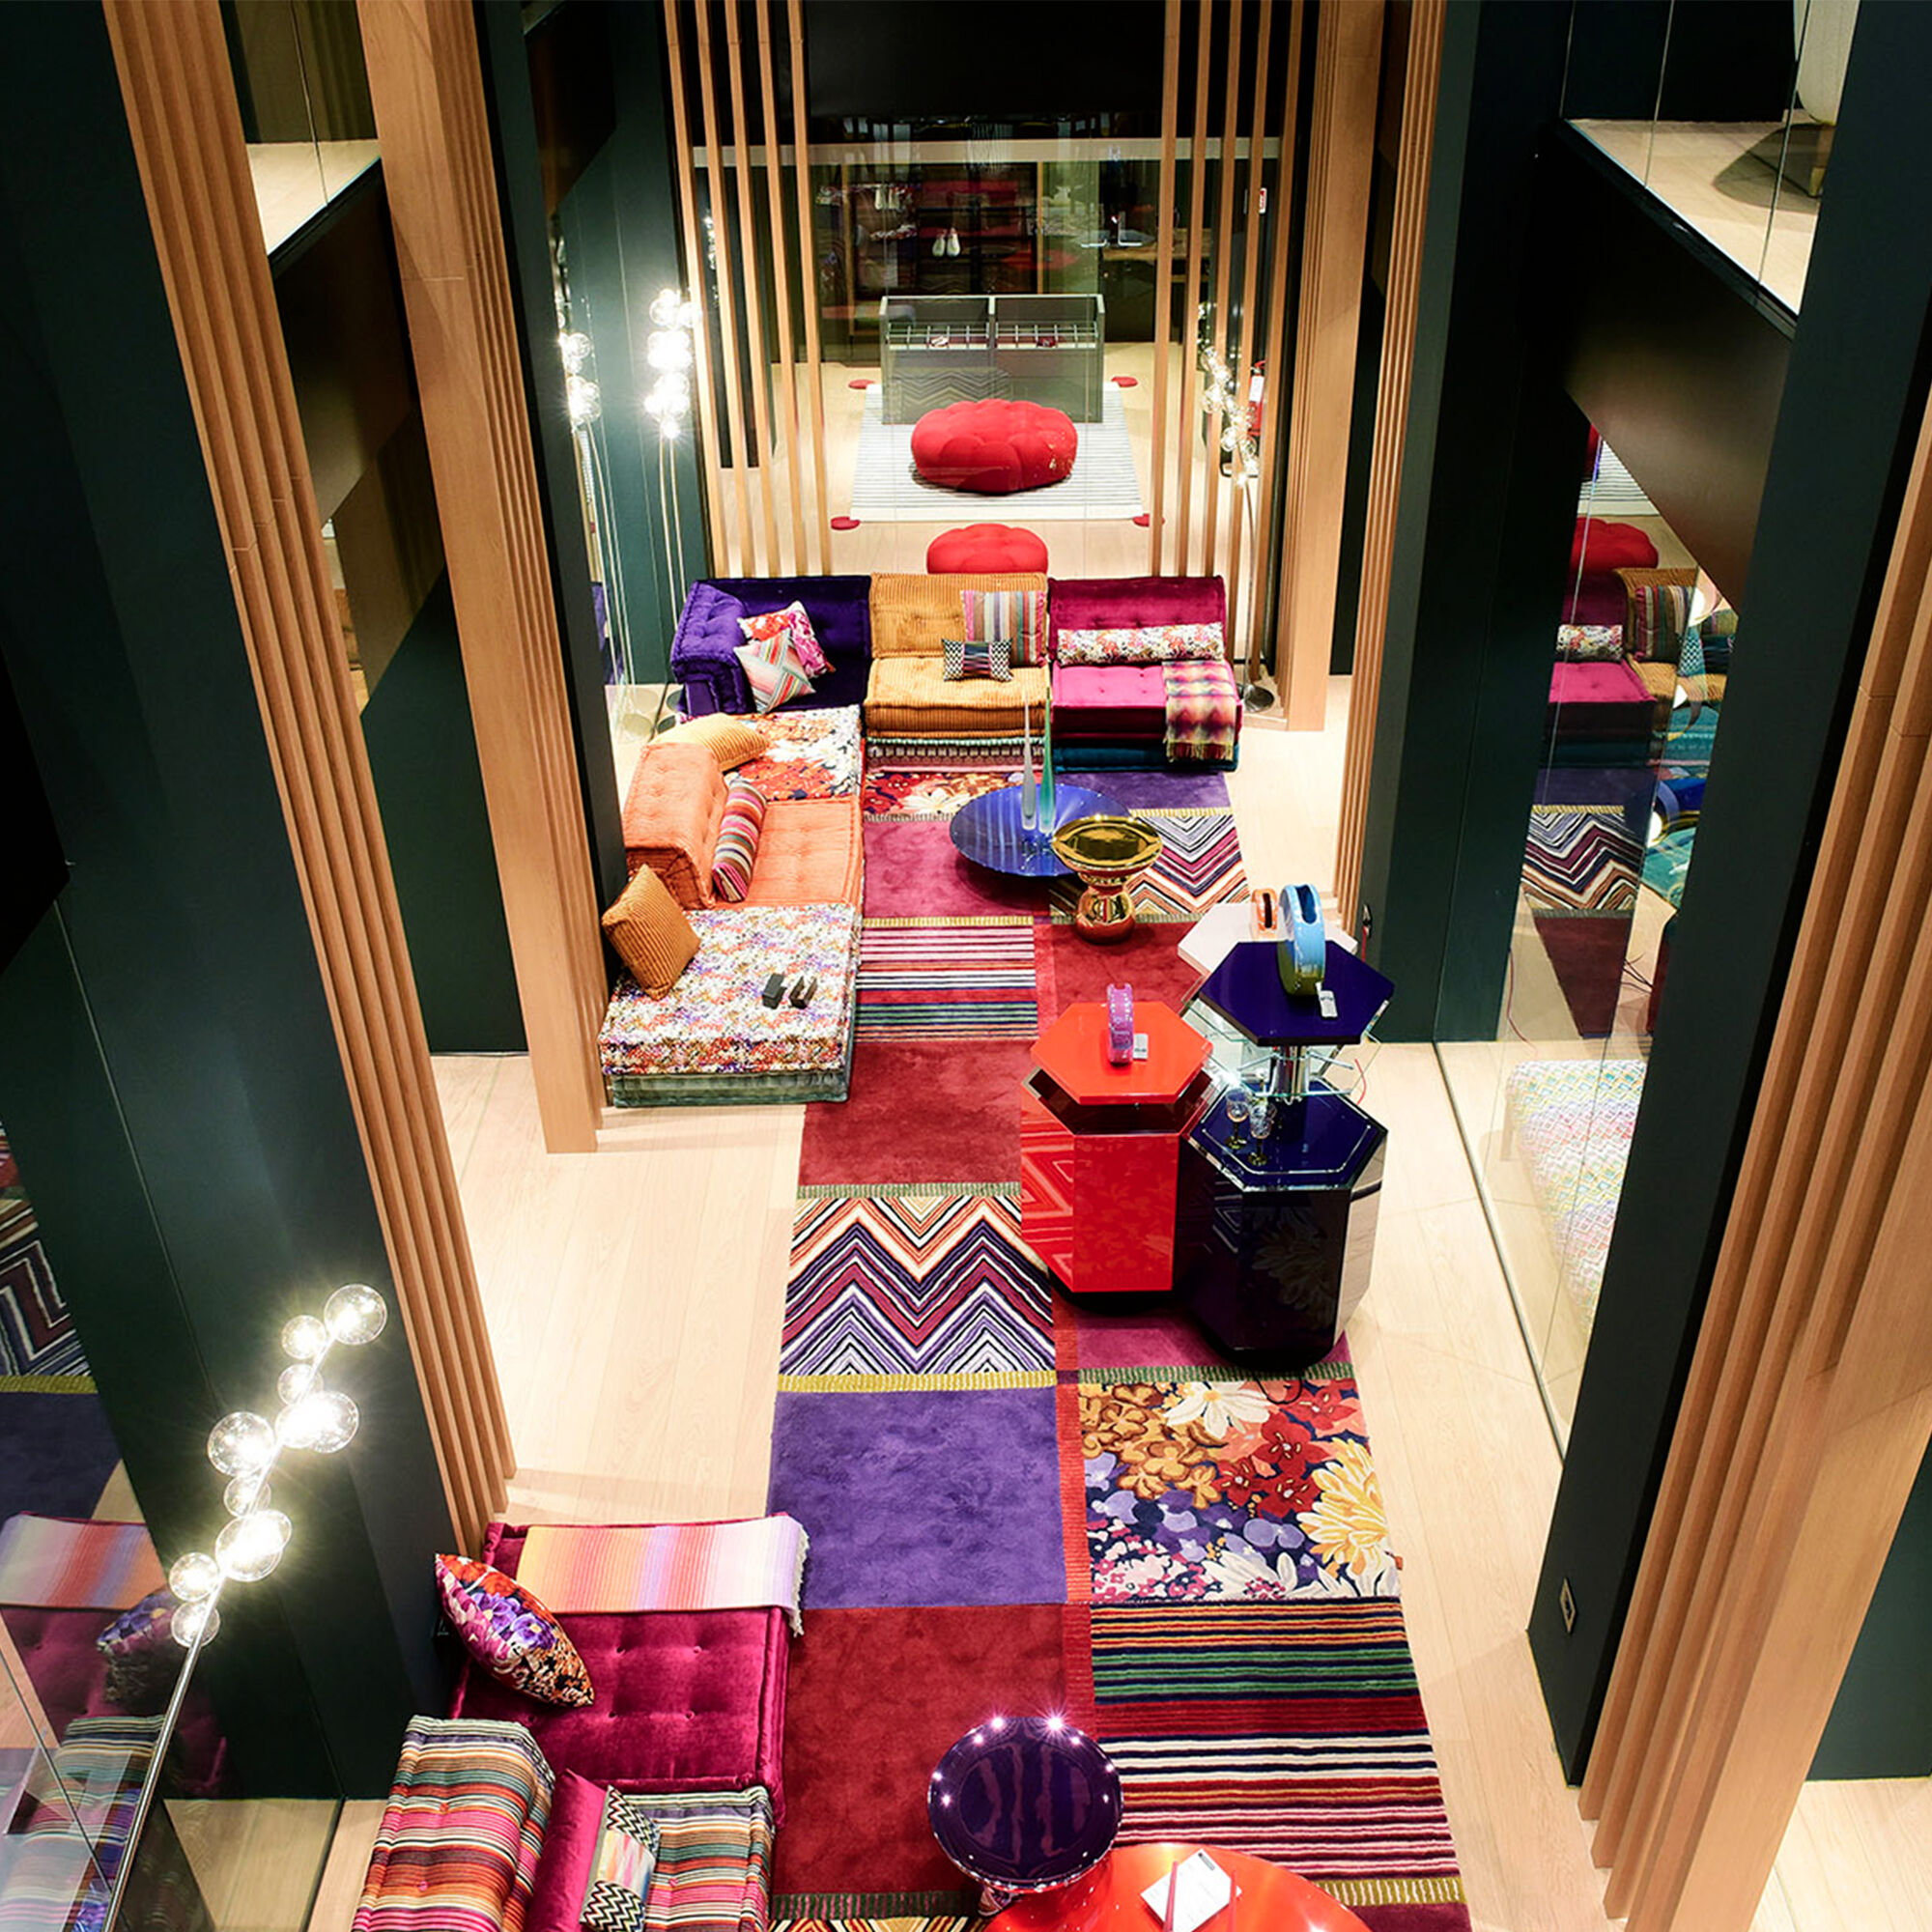 GRAND OPENING OF THE ROCHE BOBOIS FLAGSHIP IN MILAN